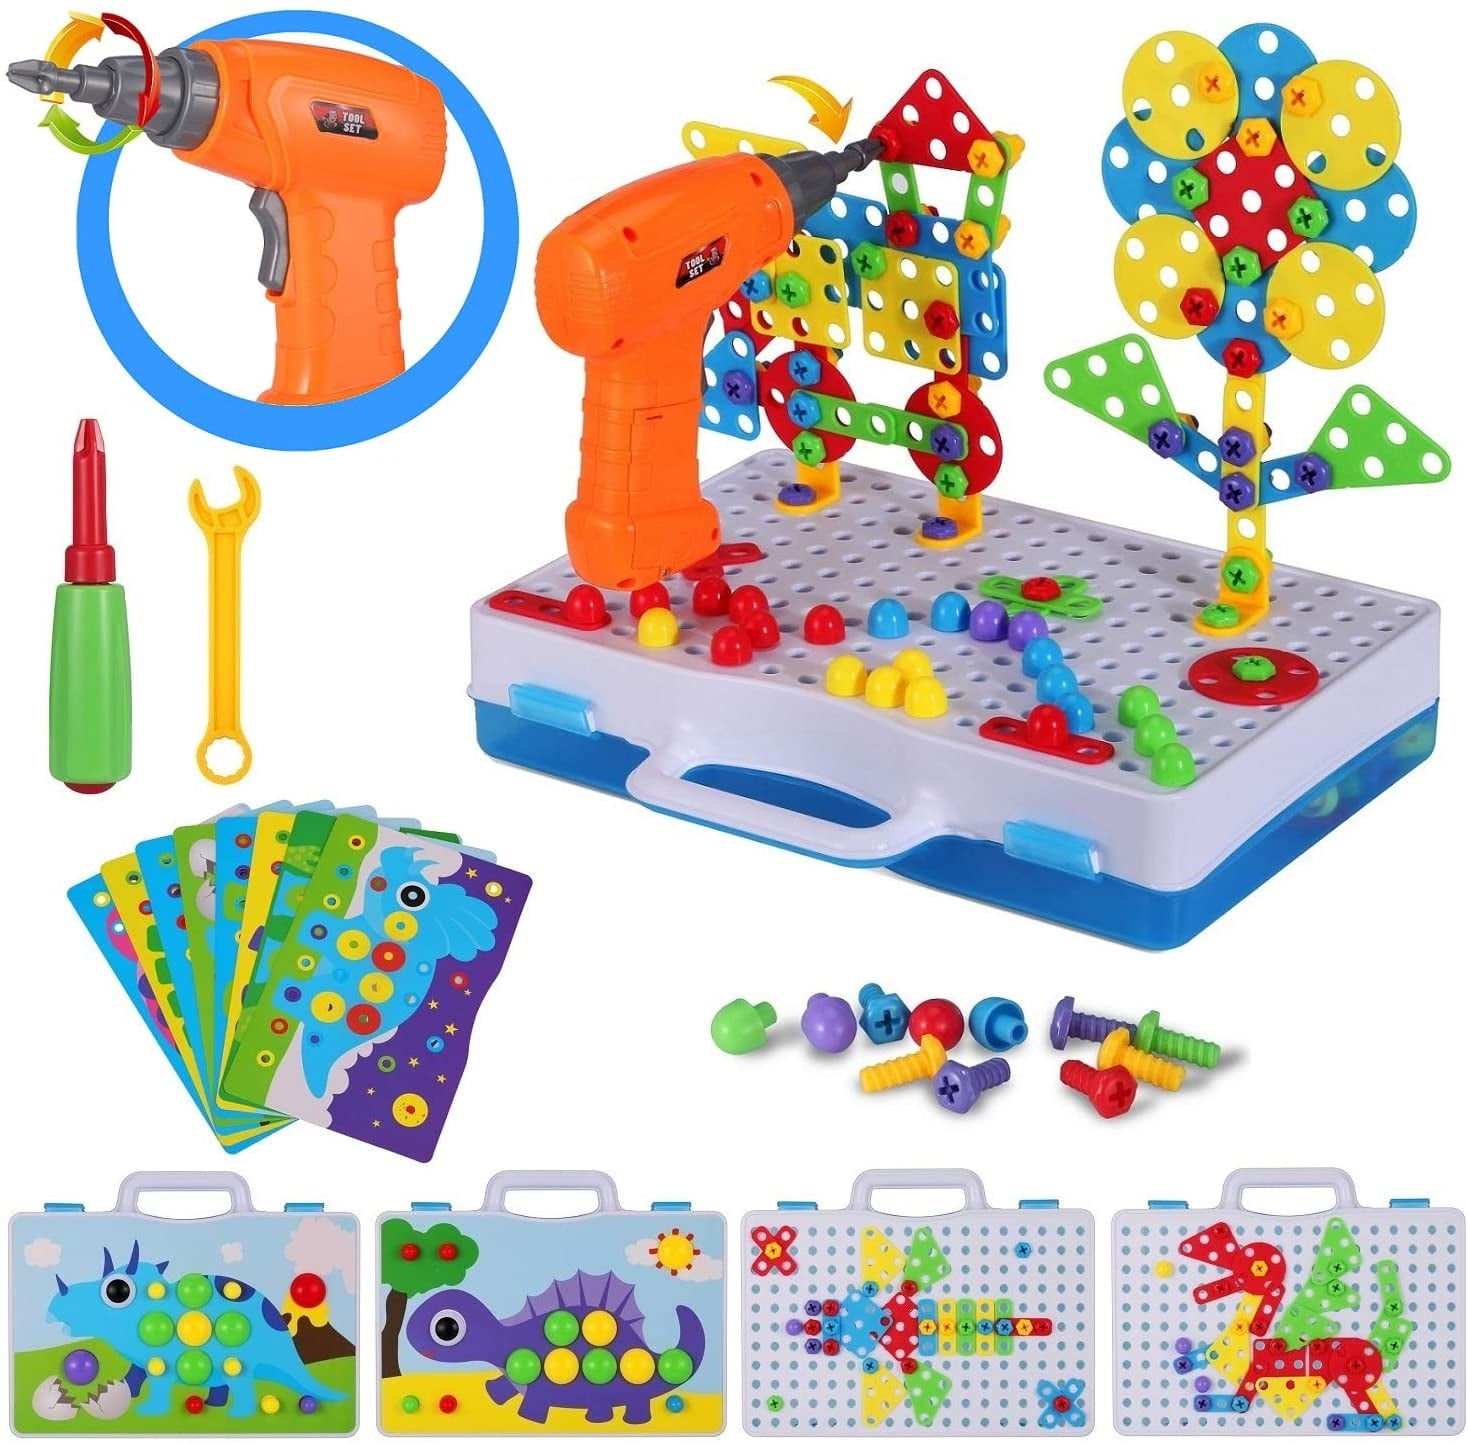 Toy Choi's Toy Drill Electric Kid Drill Set Pretend Play Drill Toy, Kids  Creativity Drill Screw Set, Construction Kids Tool Set Outdoor Preschool